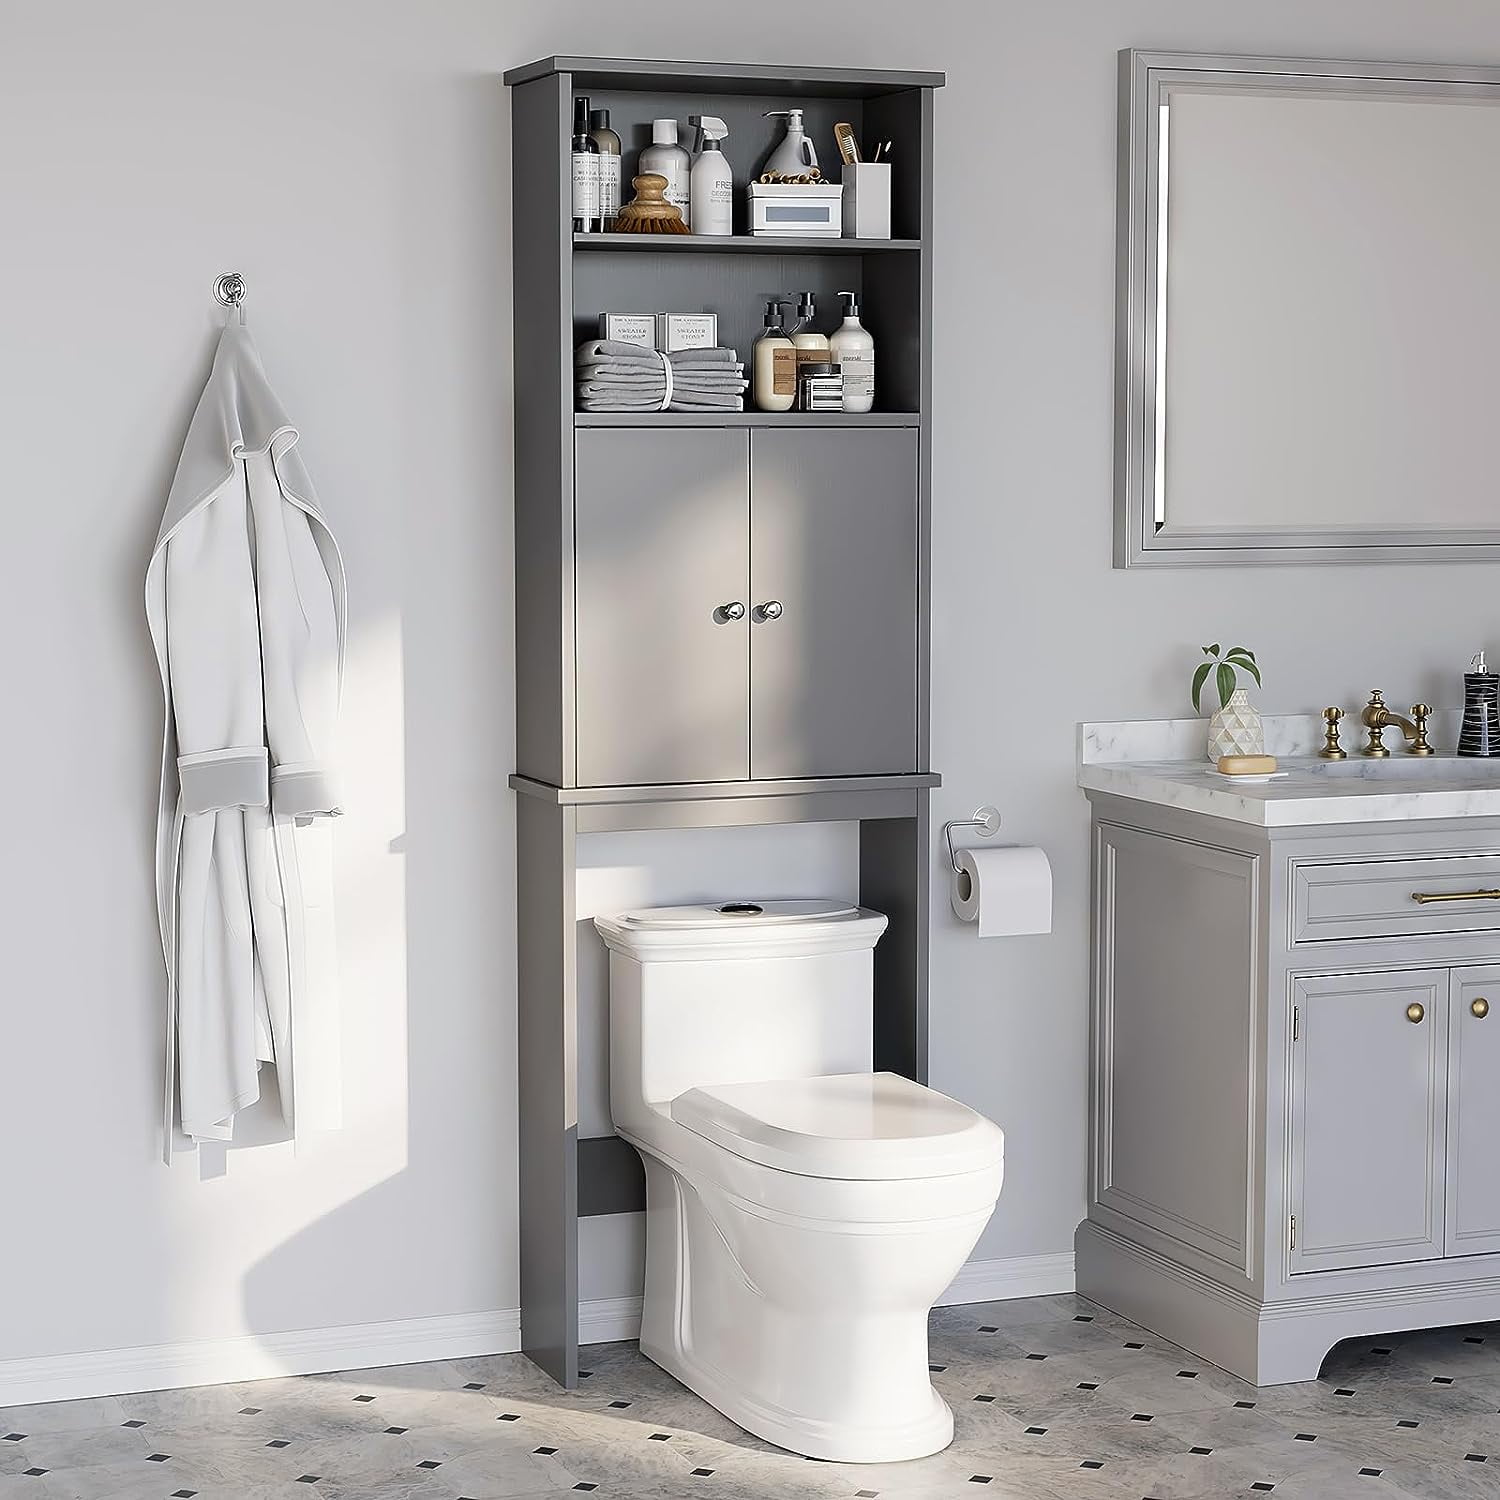 Bathroom Over-the-Toilet Space Saver with Adjustable Shelves